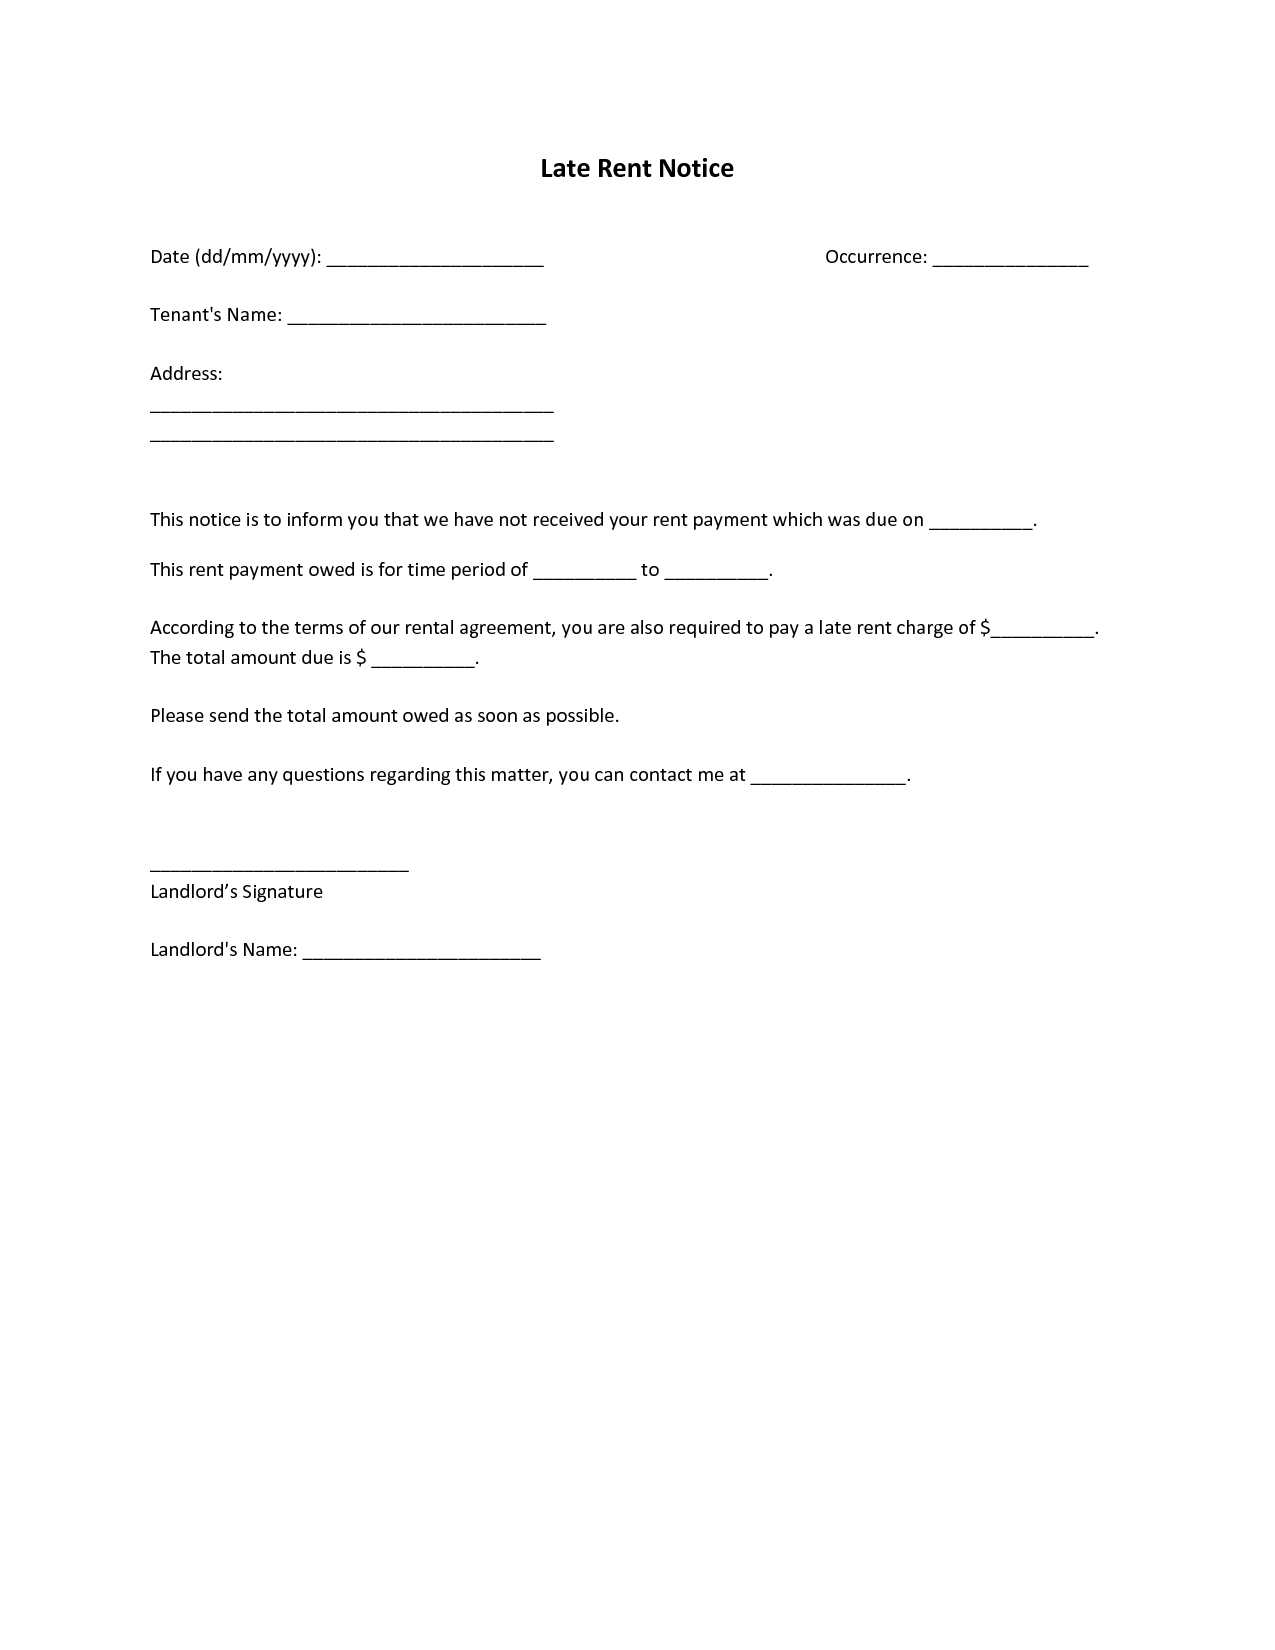 late rent letter template example-Late Rent Letter Template Uk Pics Download by size Handphone Tablet 4-j